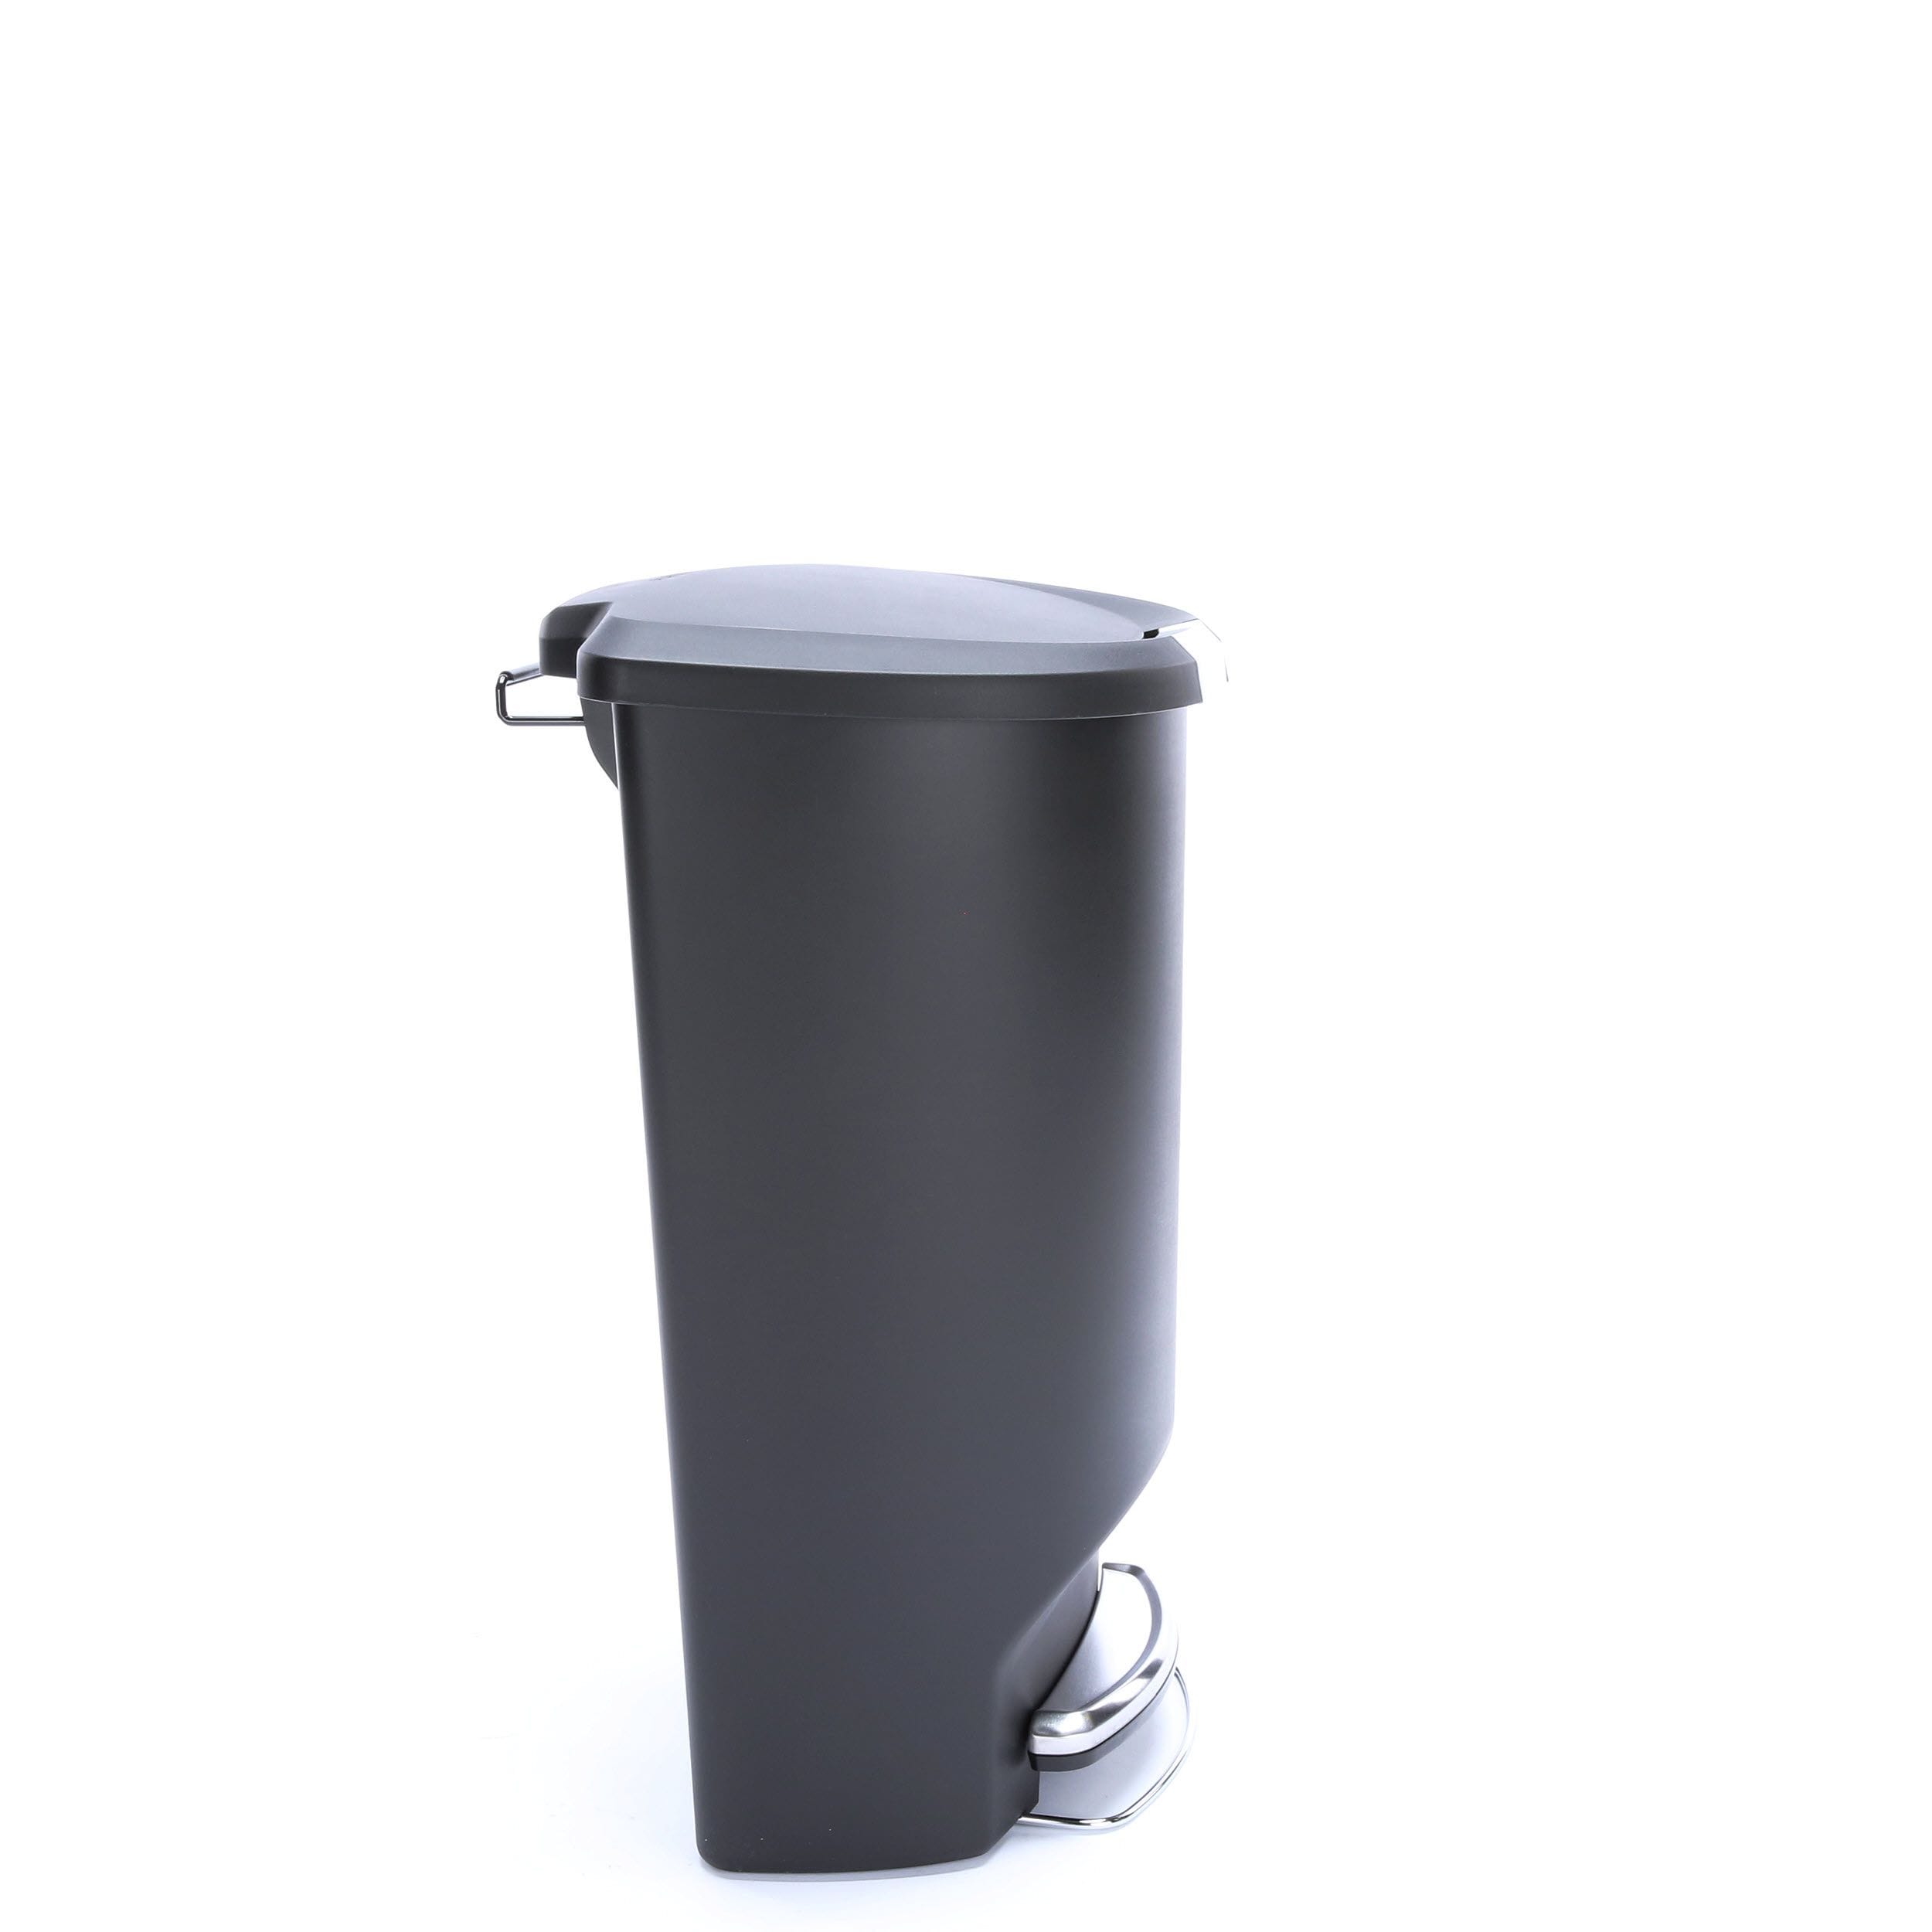 Details about   7L Round Metal Step Trash Can with Lid & Lifting Handle for Bathroom Kitchen 